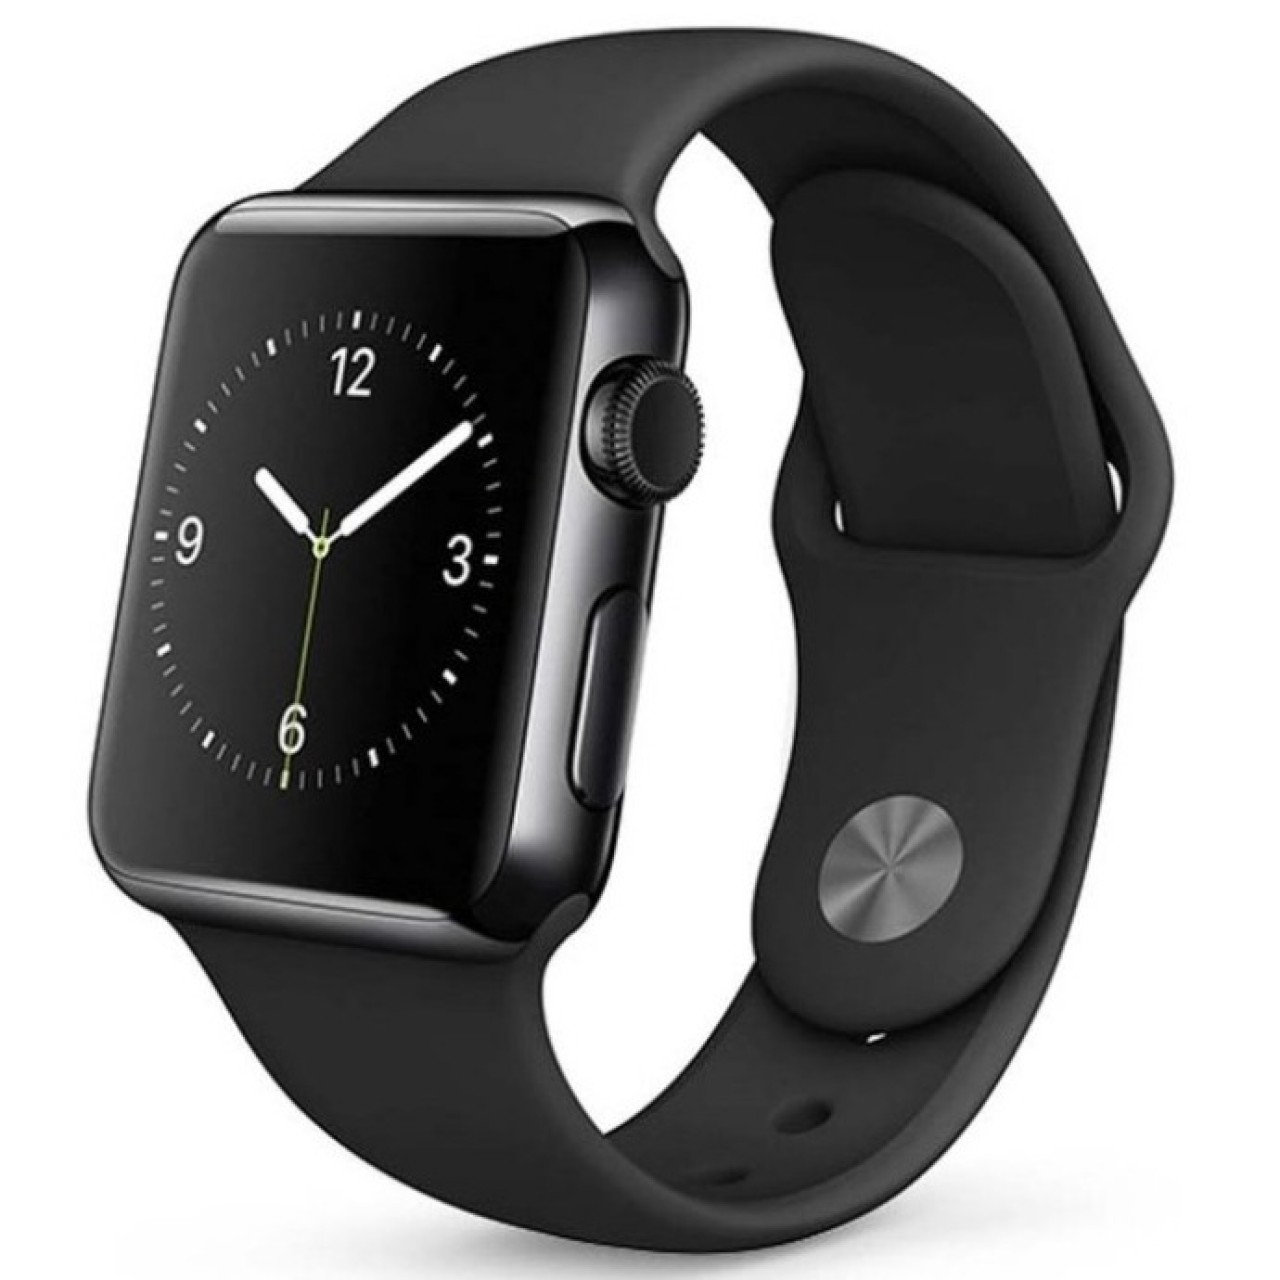 SMART WATCH BLACK W08 WITH GSM SLOT AND BLUETOOTH CONNECTIVITY FOR IOS AND ANDROID SMART PHONES